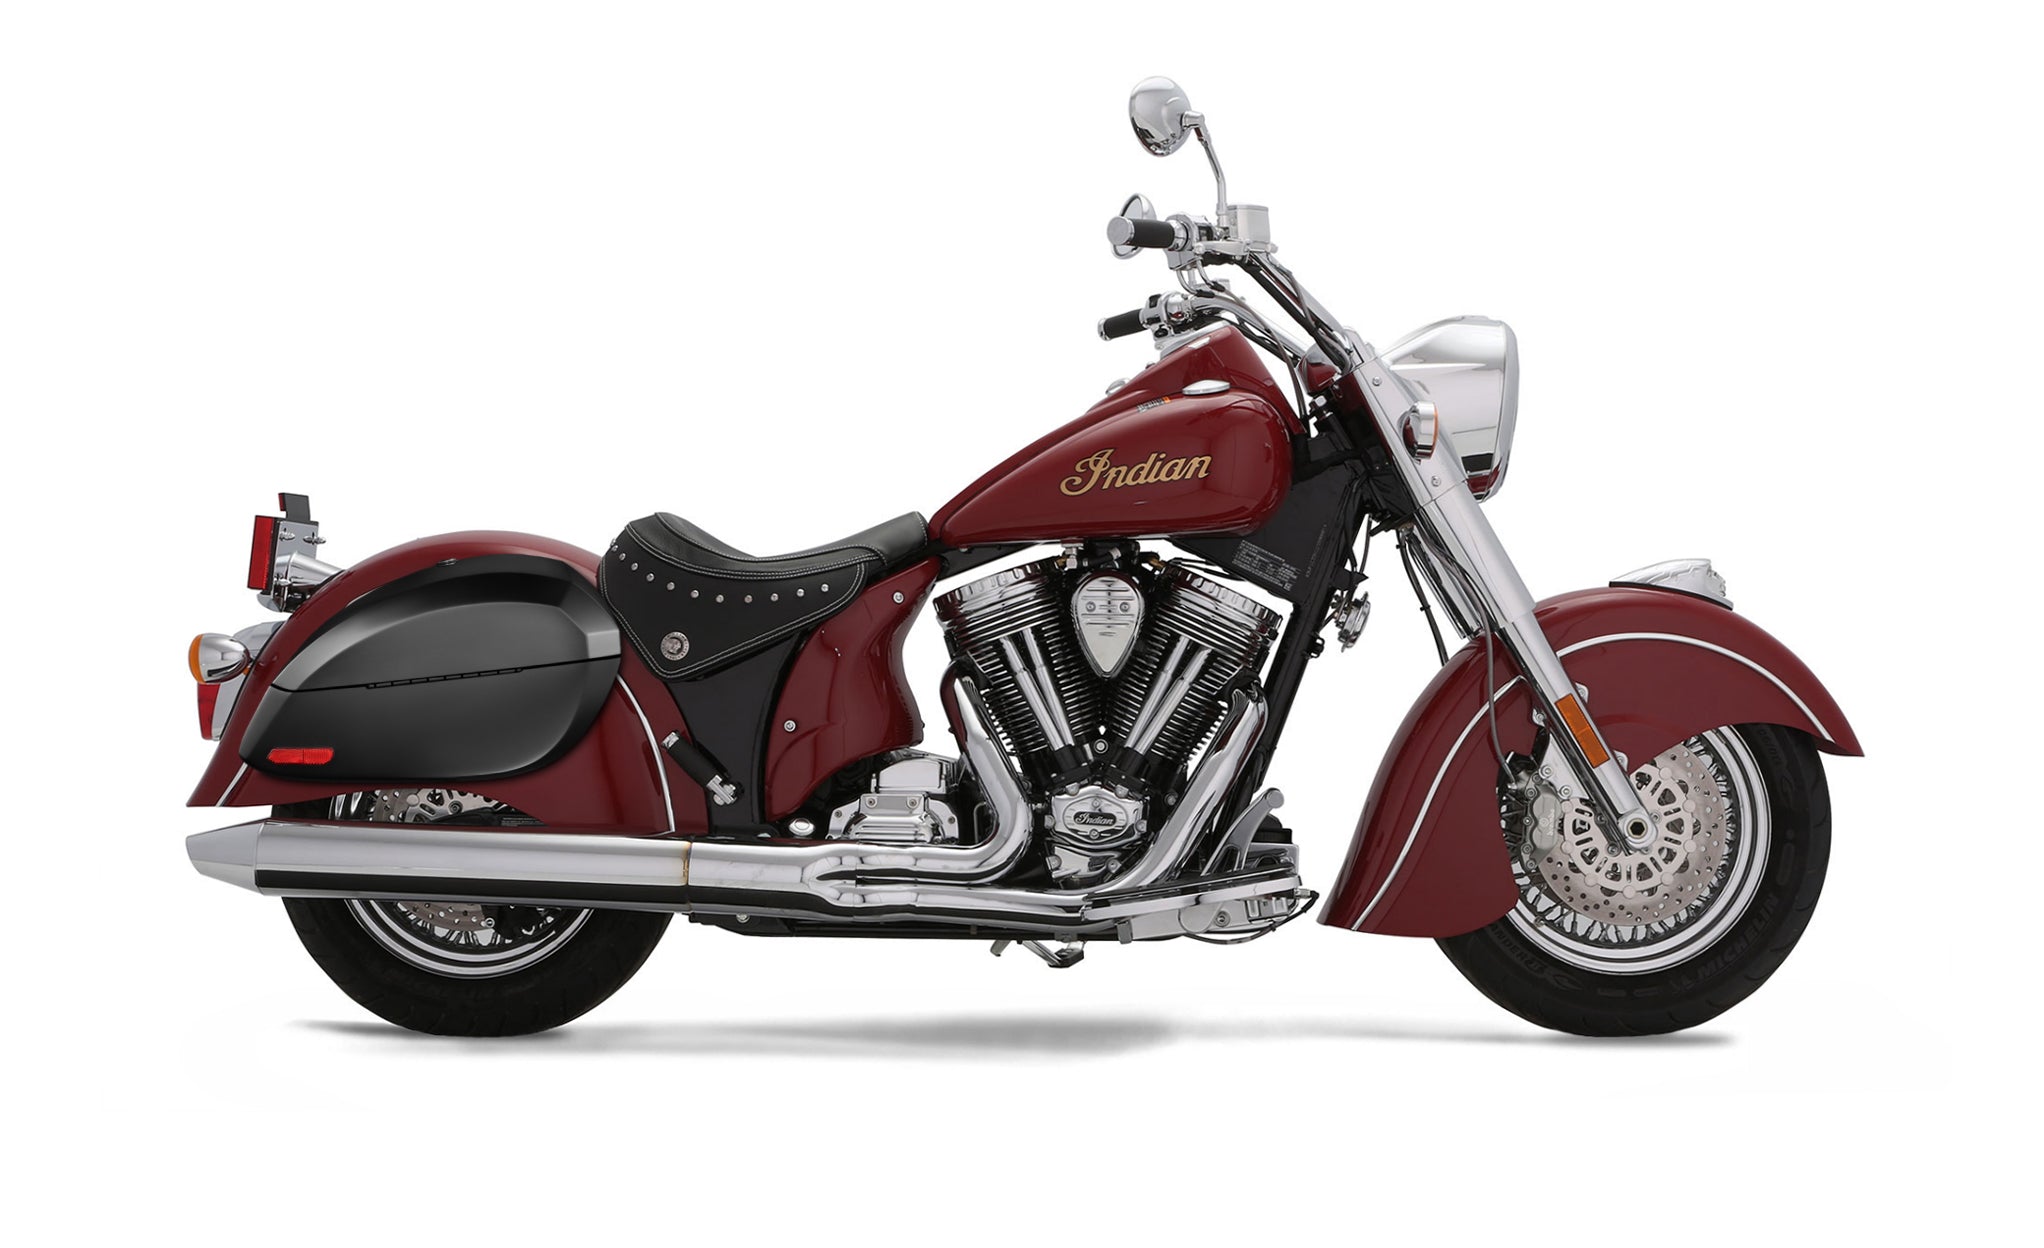 Viking Phantom Large Indian Chief Deluxe Matte Motorcycle Hard Saddlebags Engineering Excellence with Bag on Bike @expand